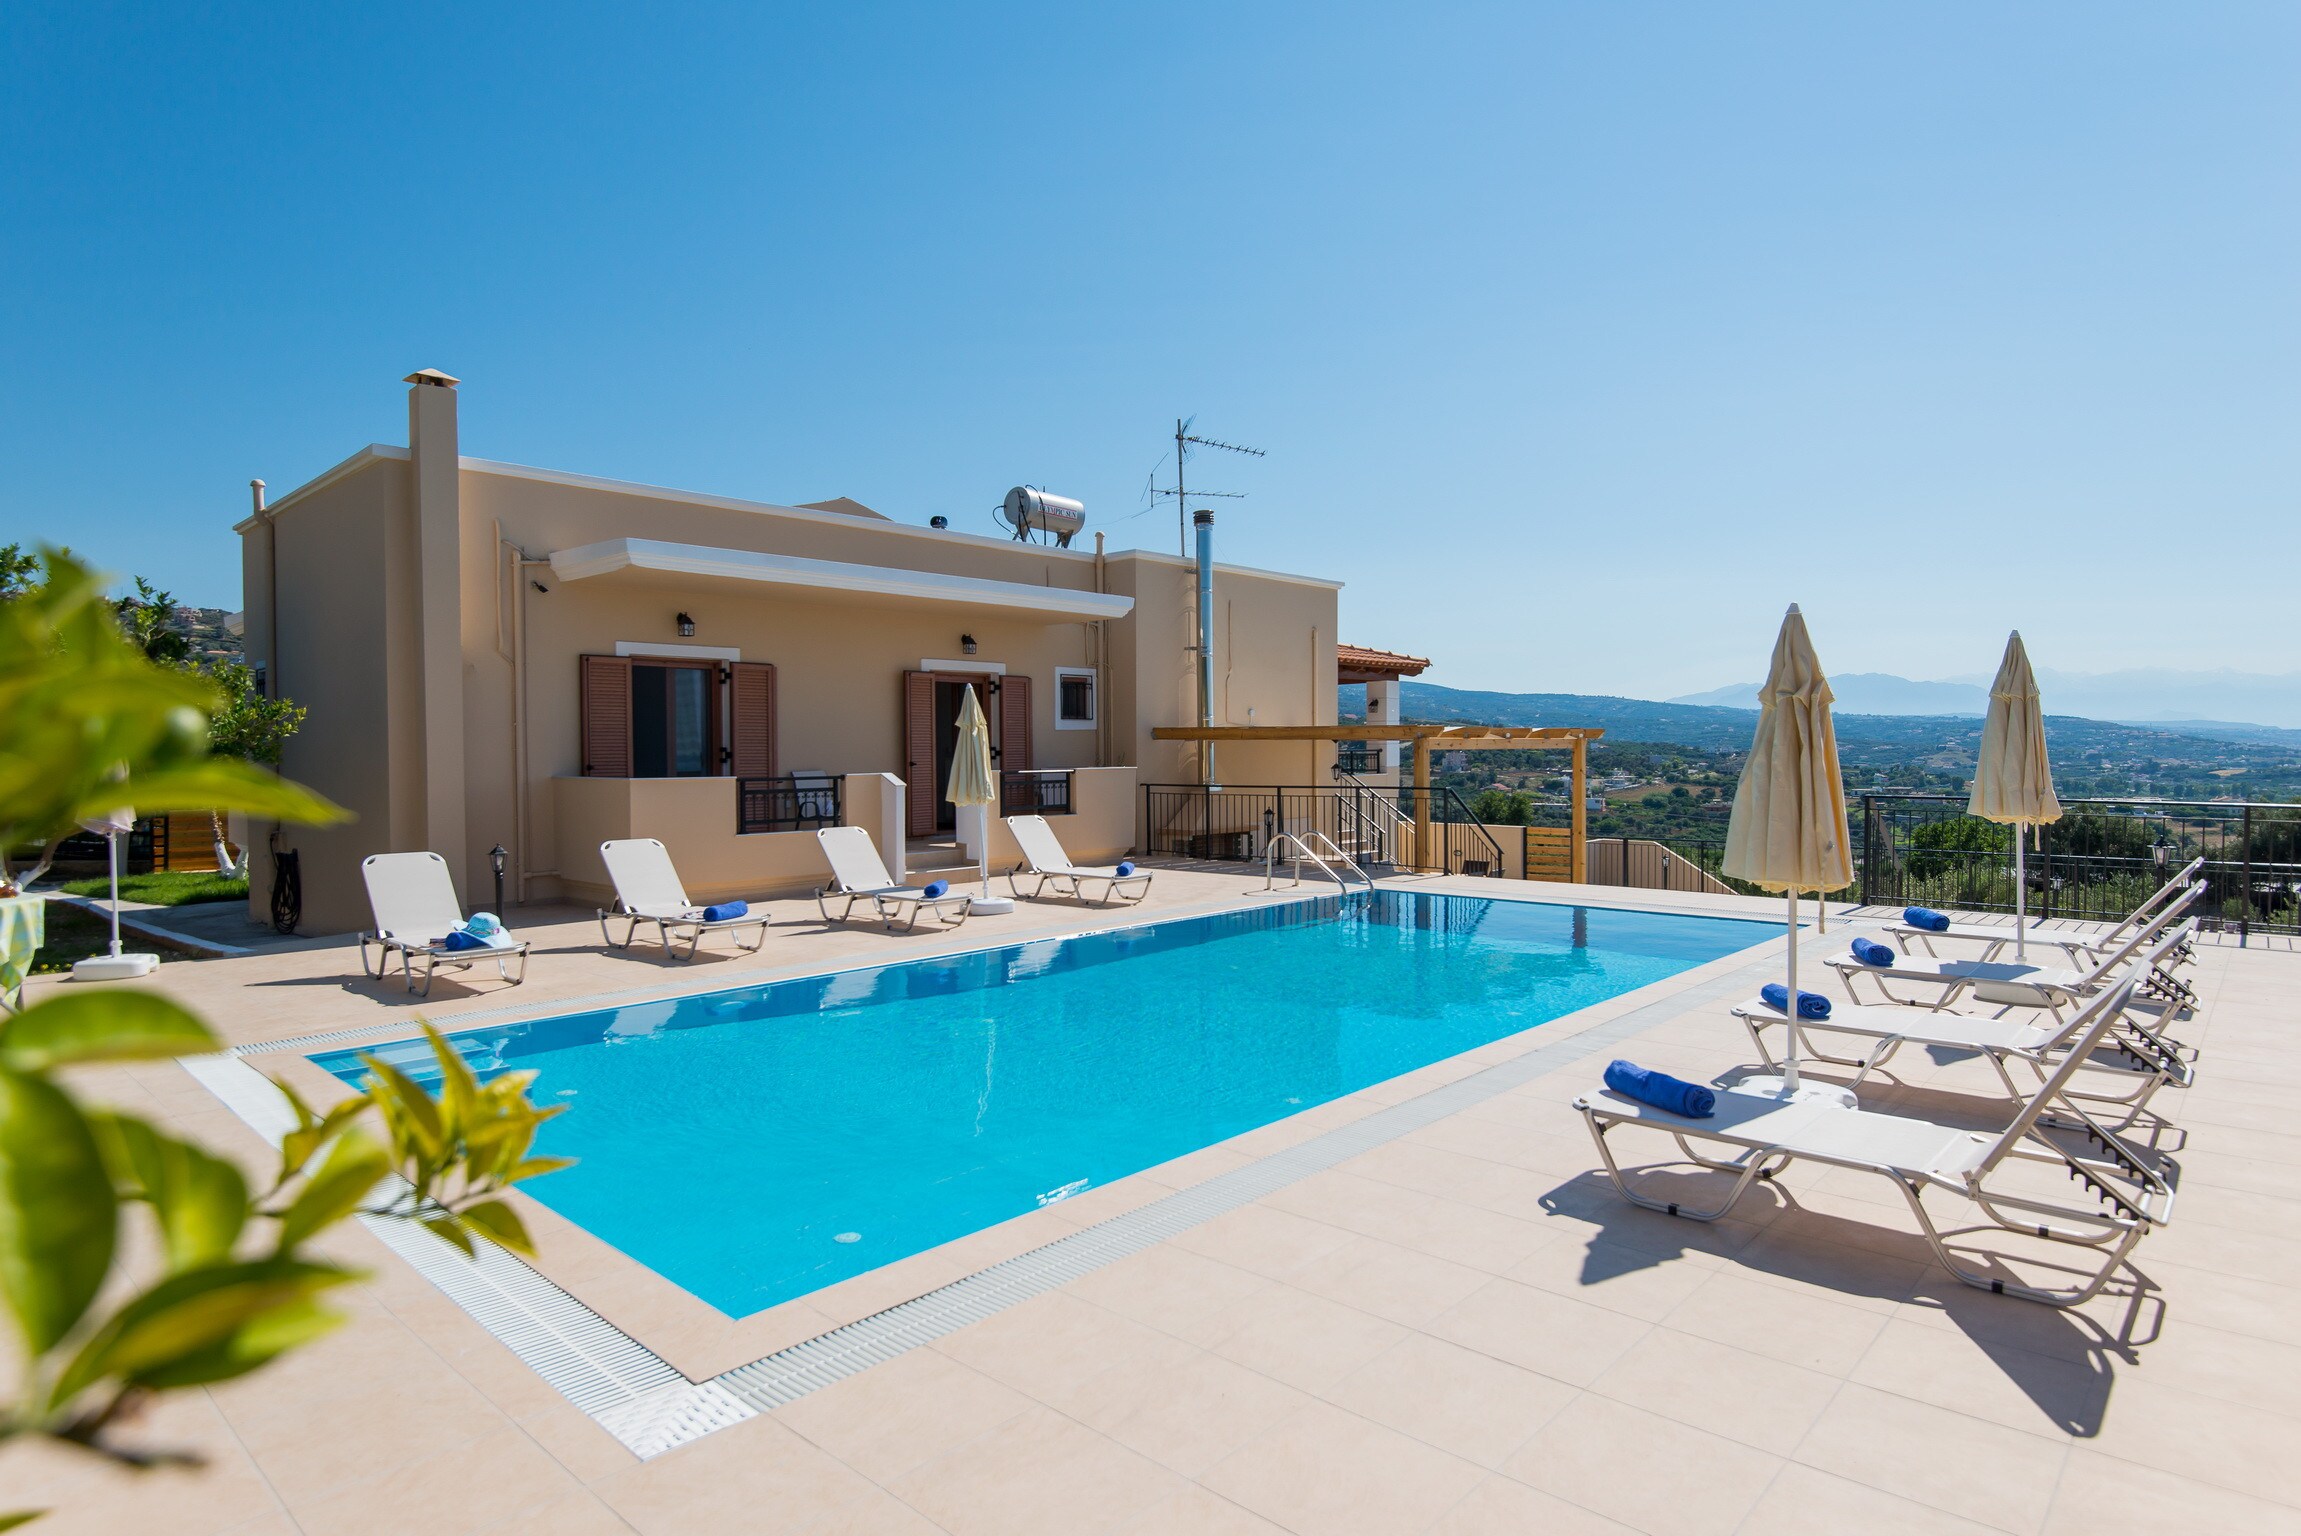 Swimming pool area of large modern villa with private pool near Platanes, Rethymno, Crete